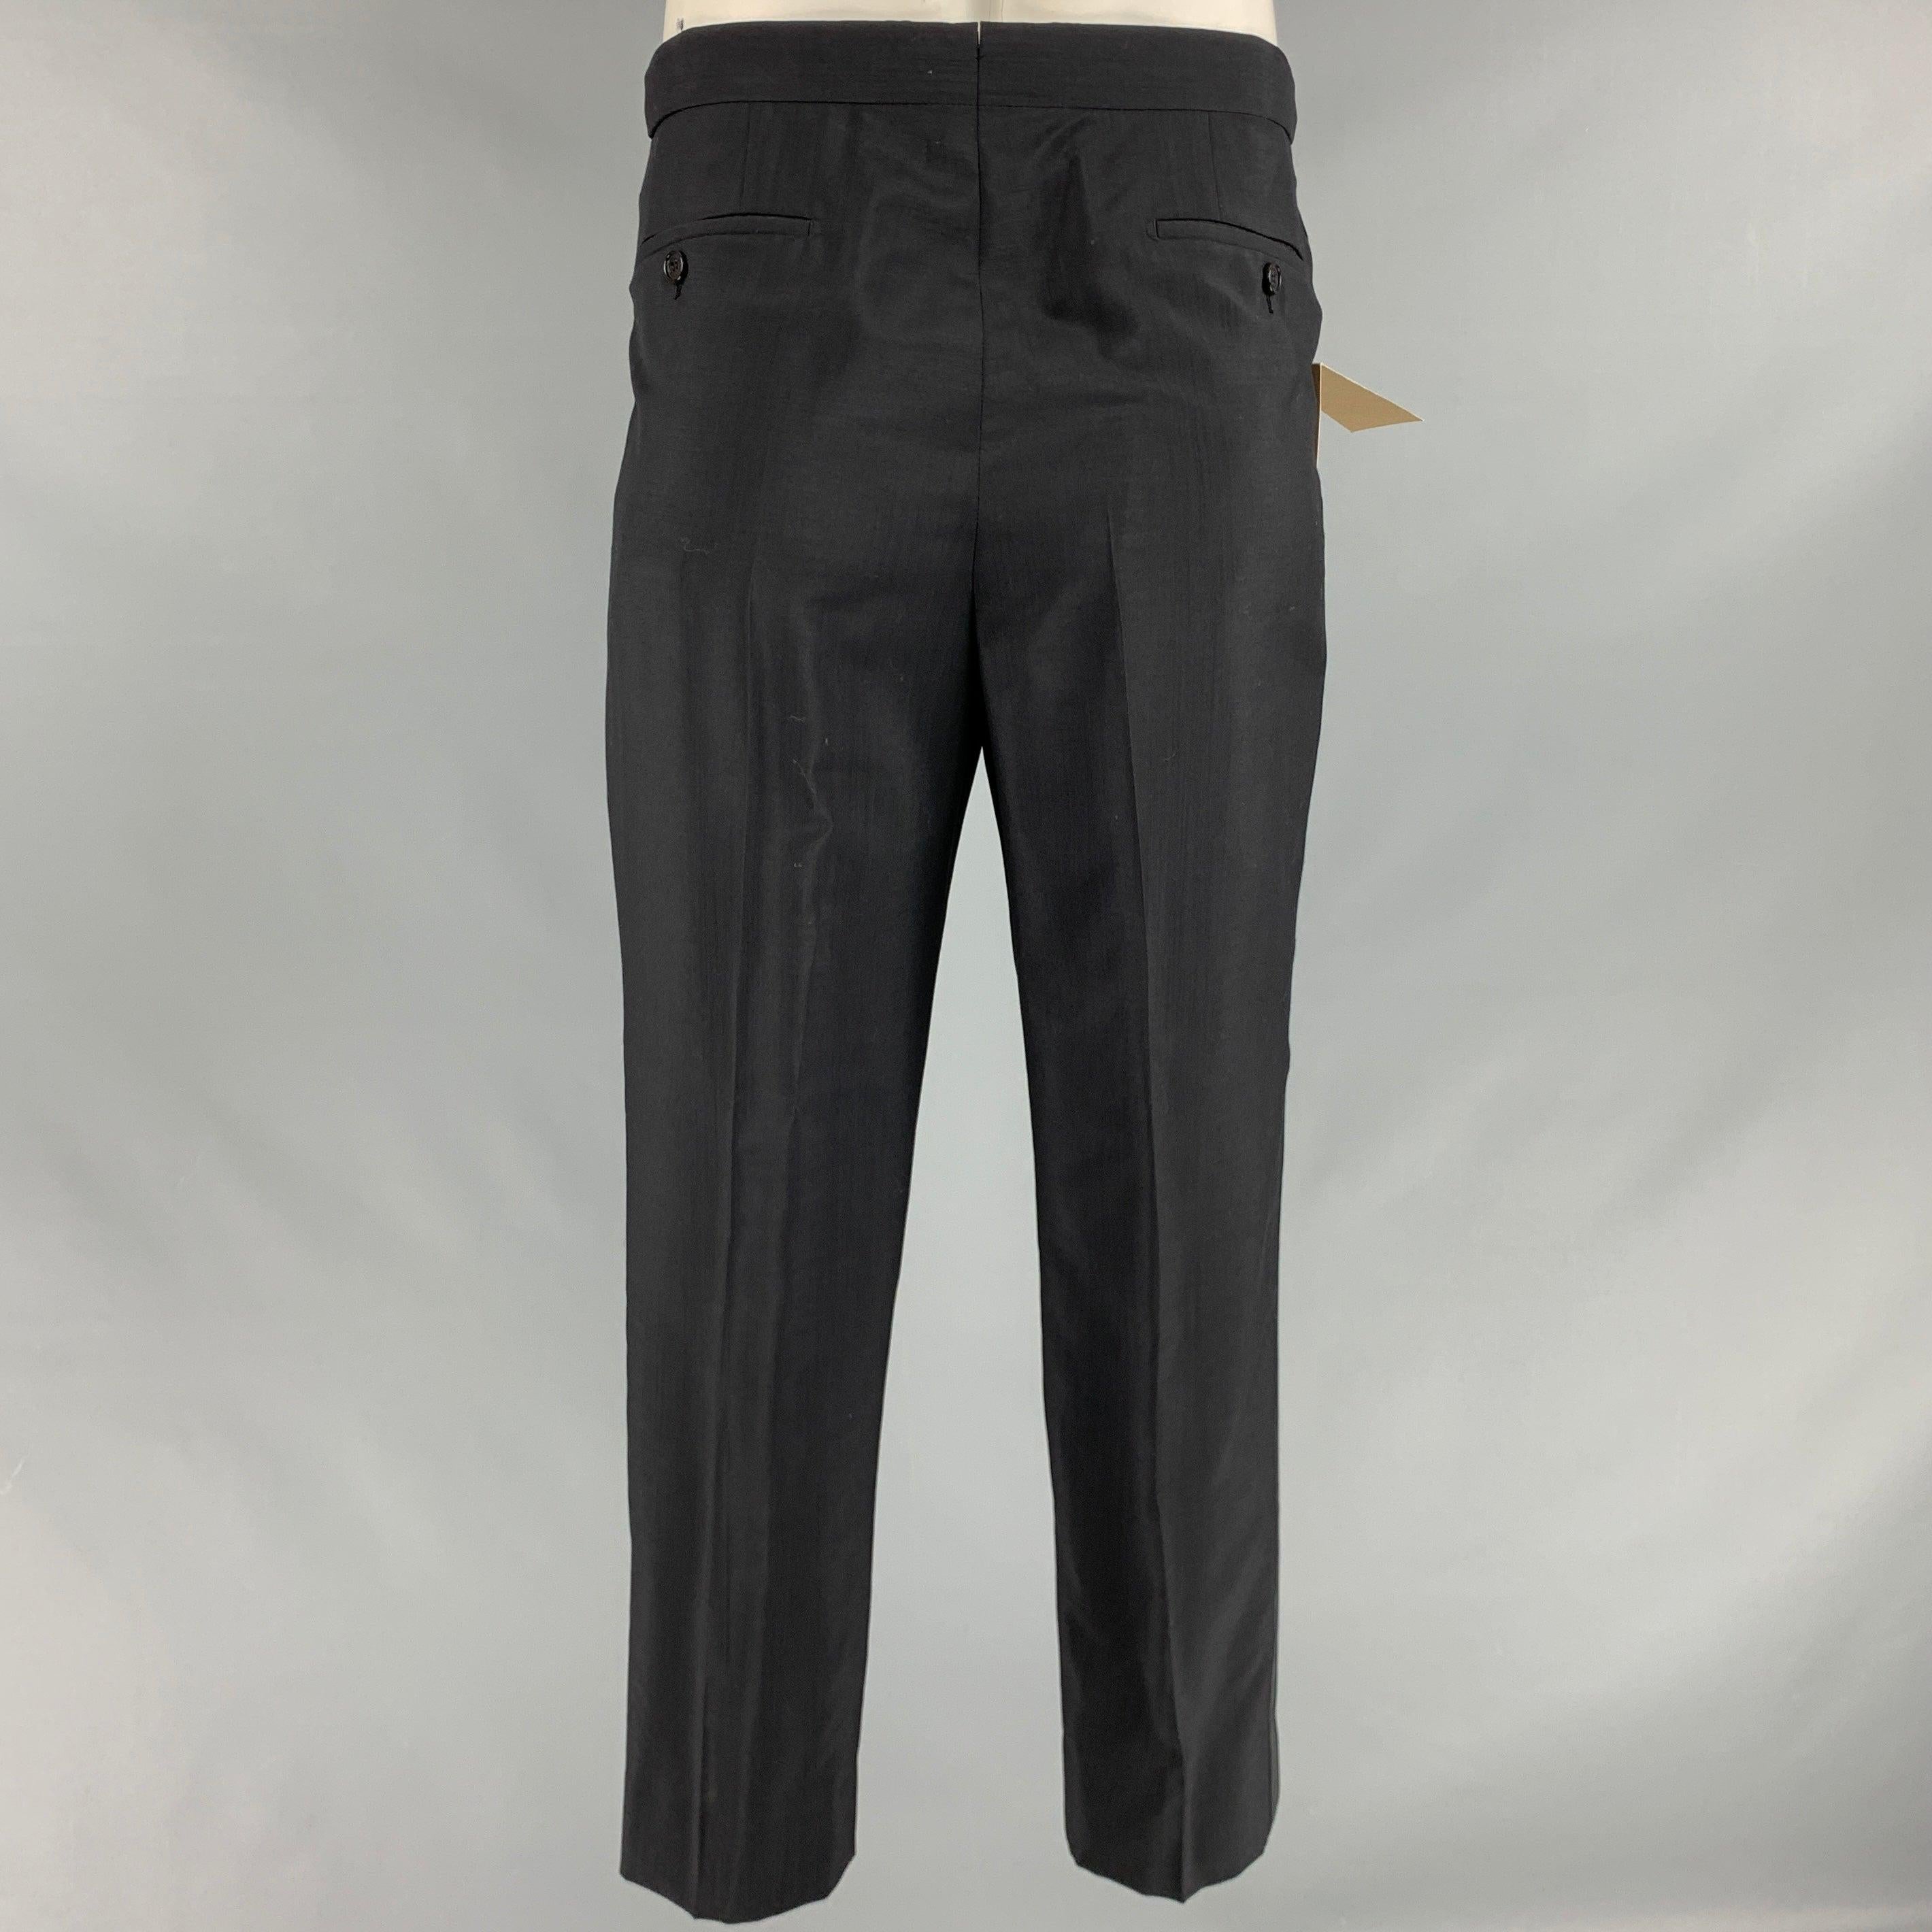 BURBERRY tuxedo pants
in a black wool mohair blend fabric featuring tuxedo stripes, side tabs, and zip fly closure. Made in Italy. Note: this item has been altered, please check measurements.Very Good Pre-Owned Condition with Tags. Minor hole on